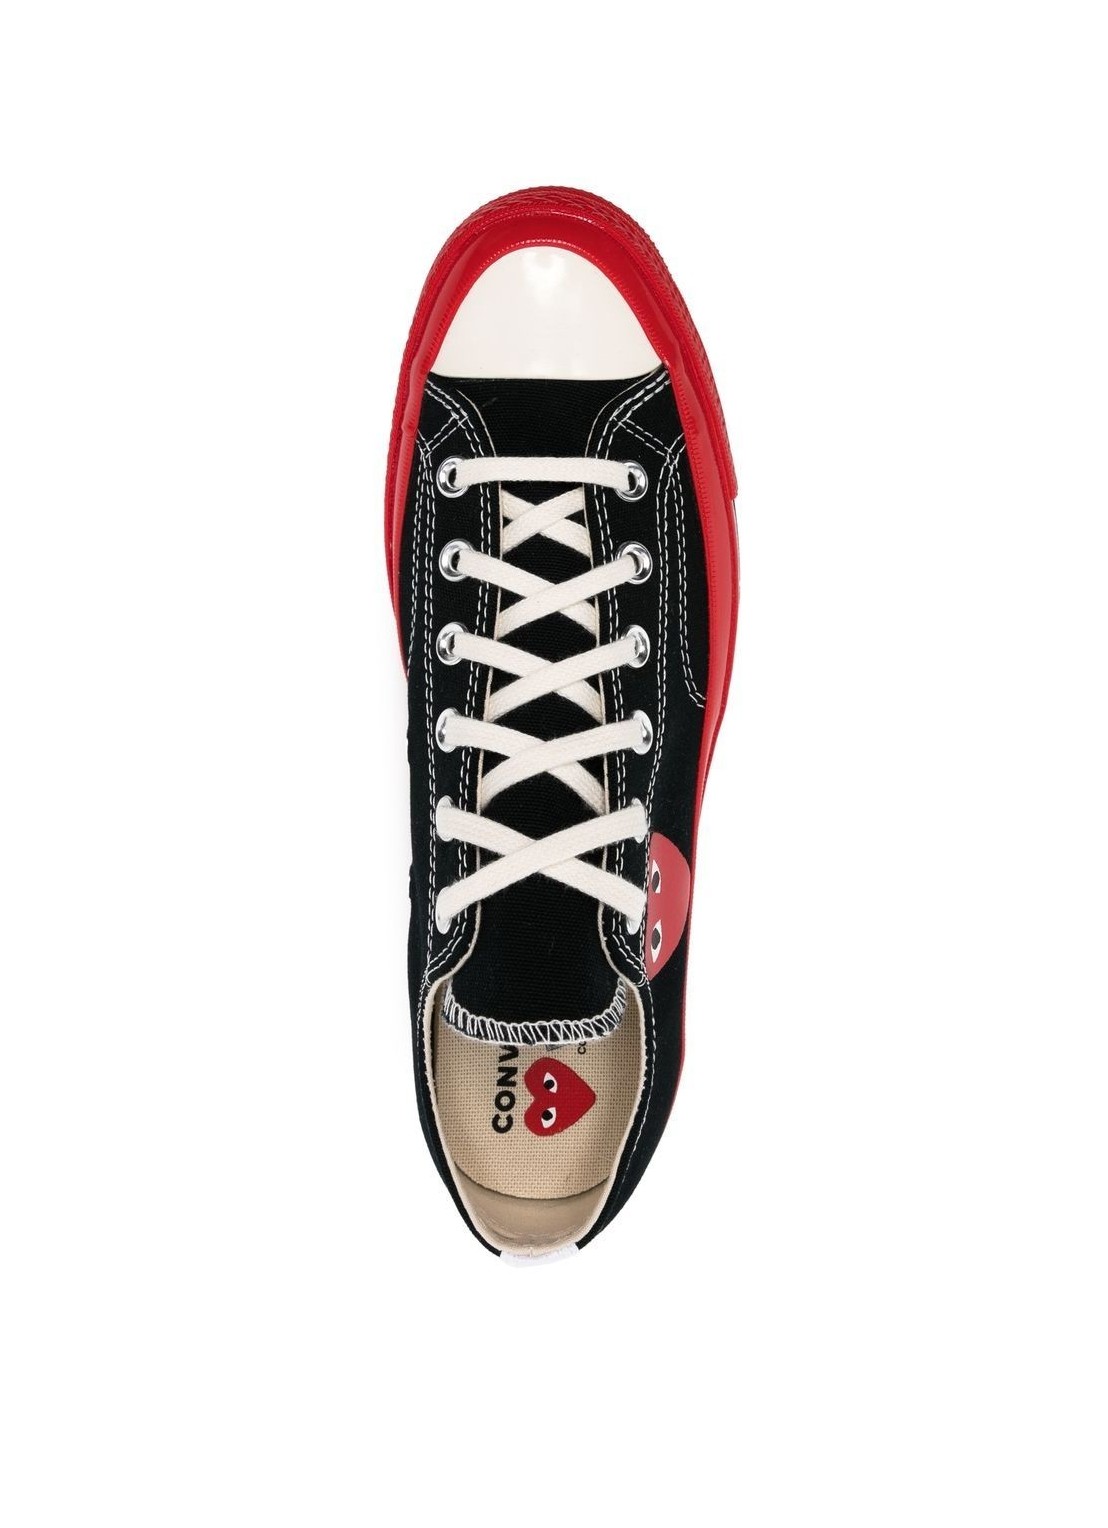 comme converse red sole low top - p1k123 black Talla 42